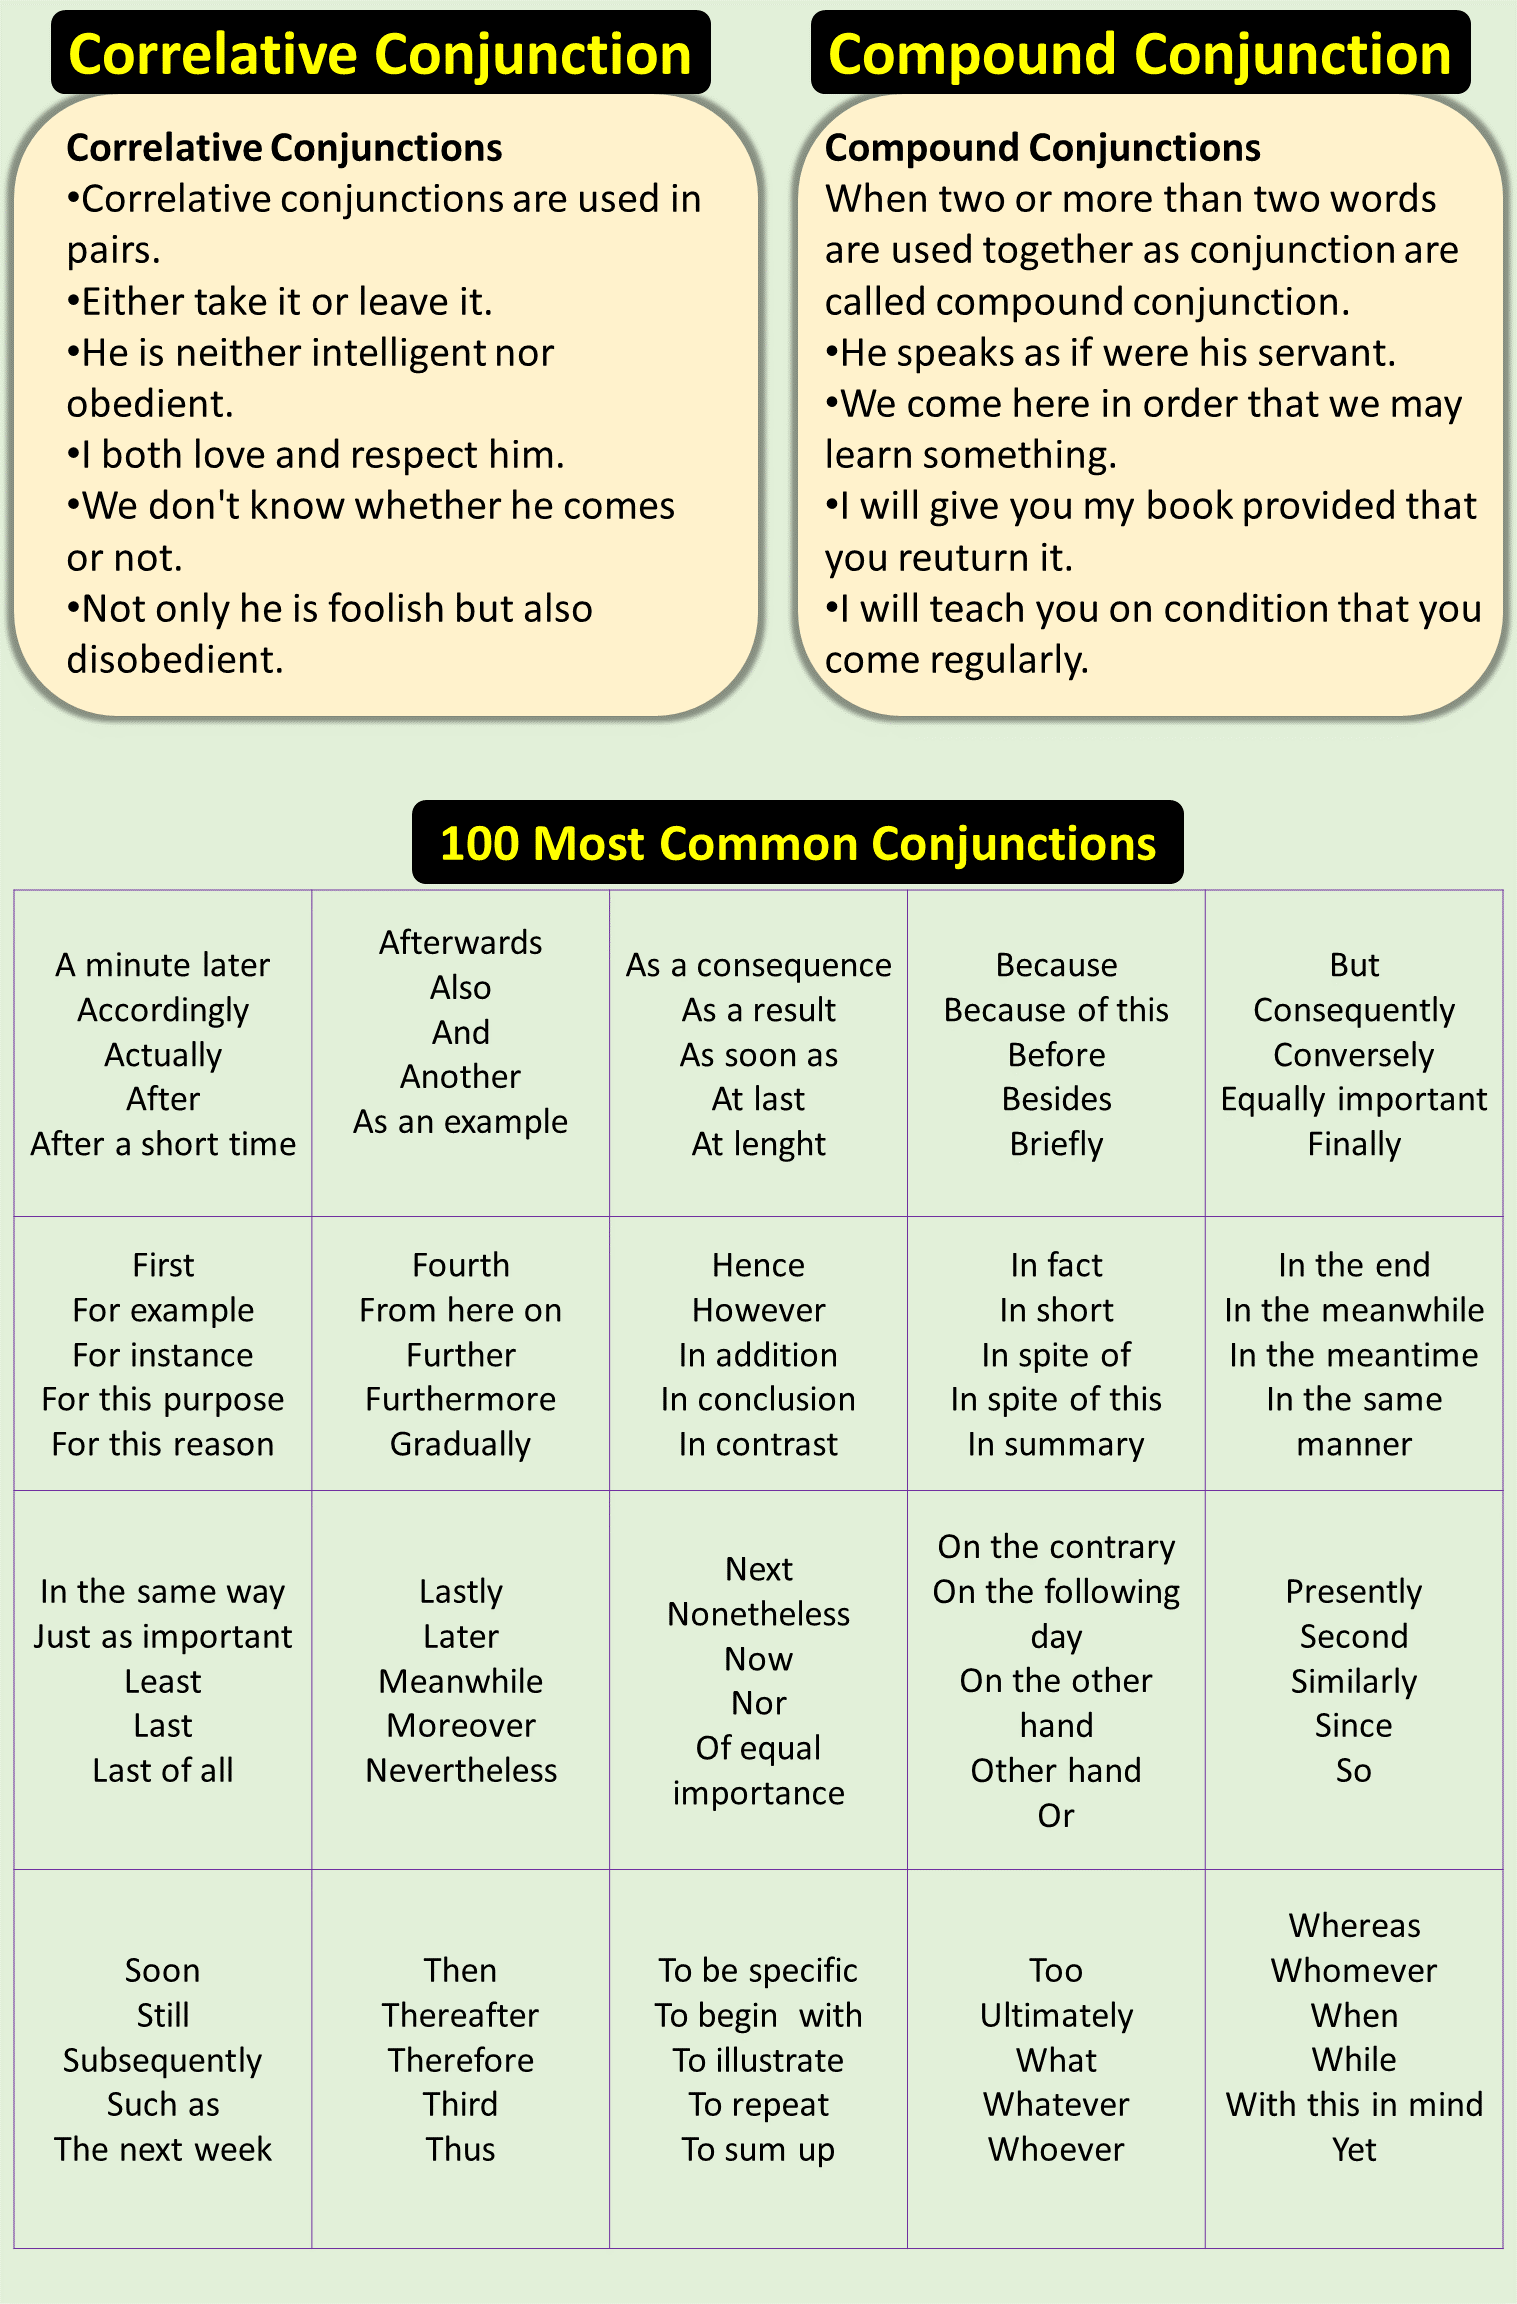 Conjunction And Types Of Conjunction With Examples